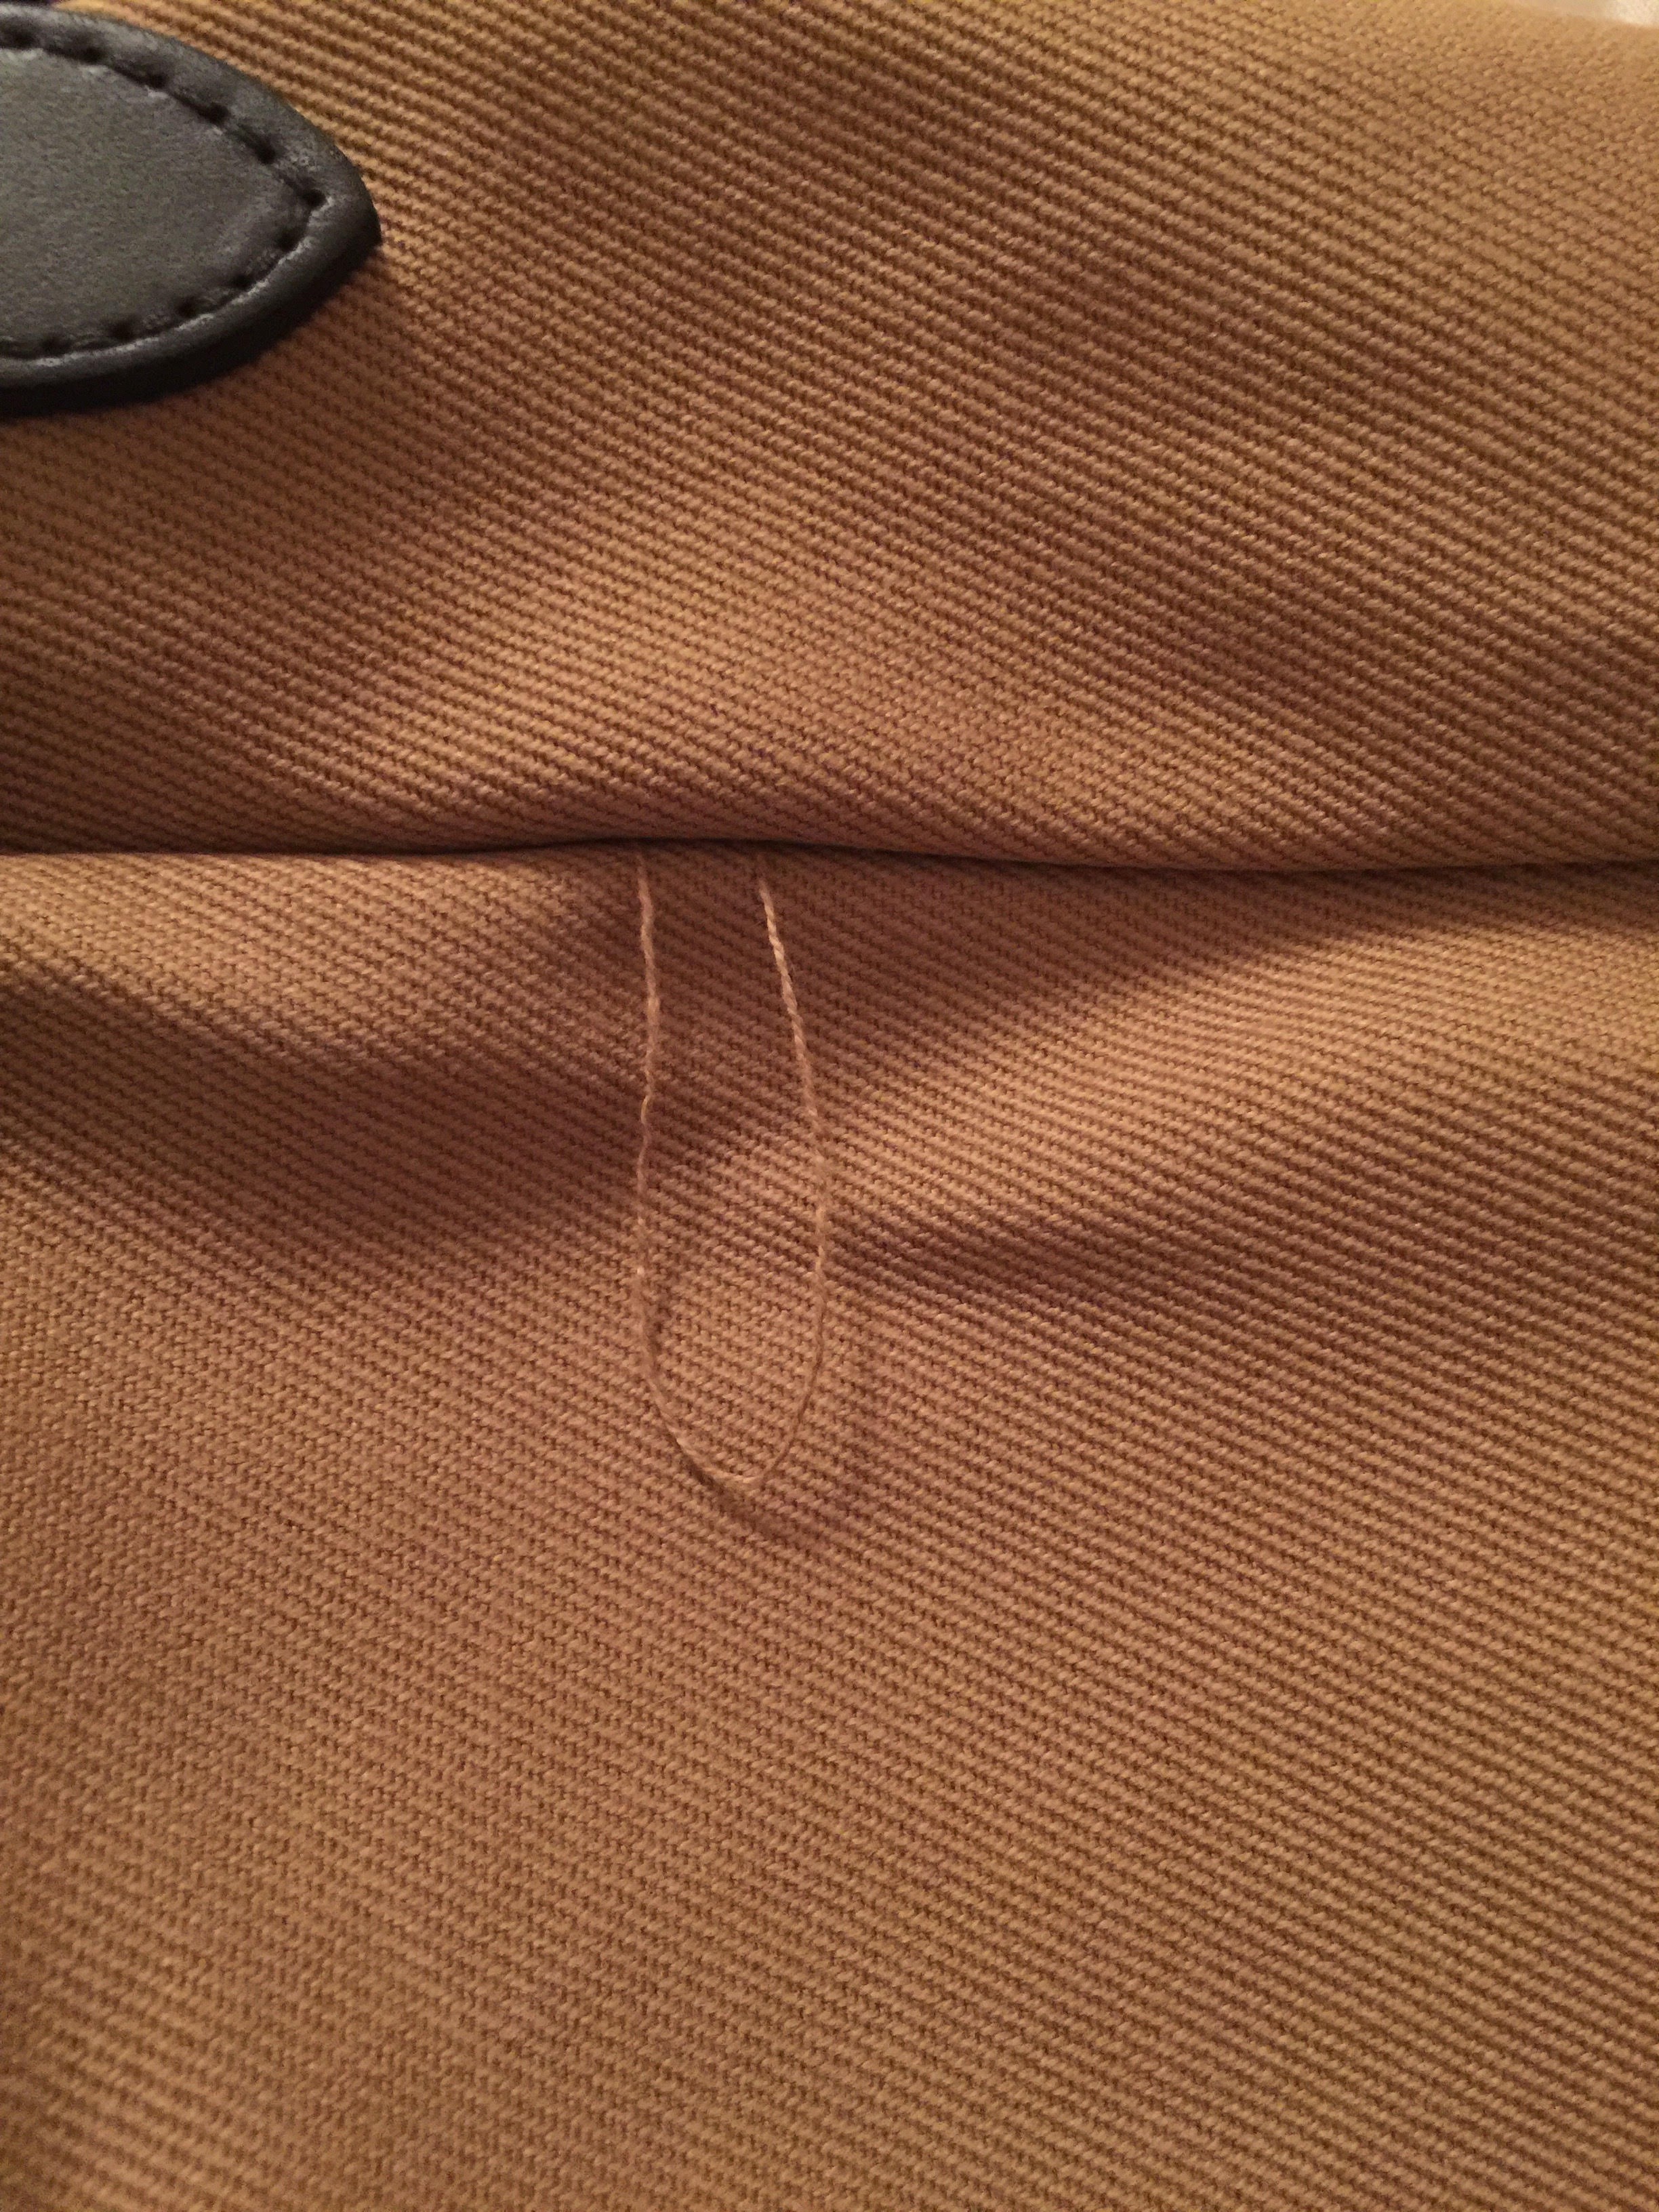 Filson Bag Thread: With Pictures | Page 408 | Styleforum